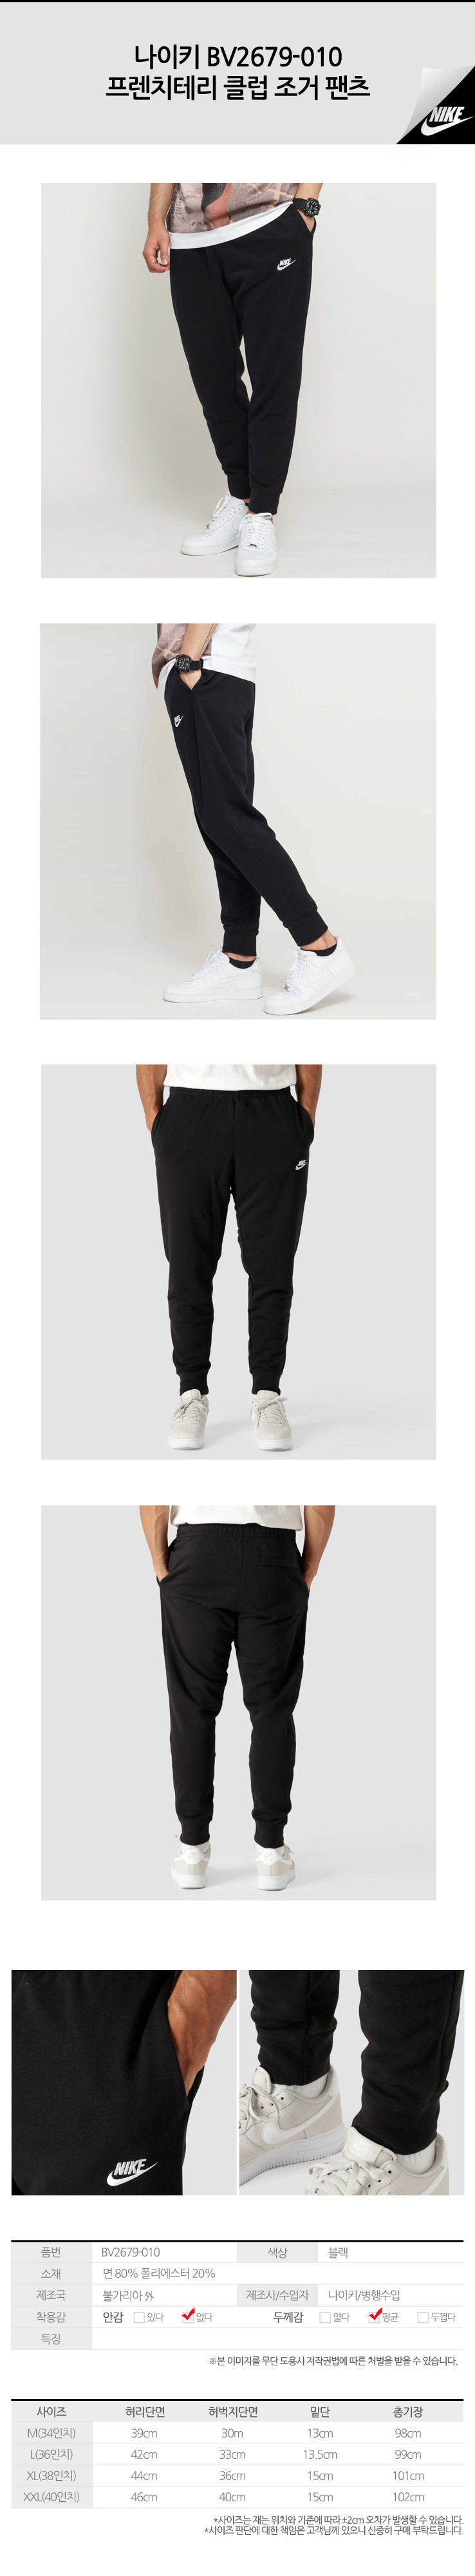 Gmarket - [Nike]Official Product/Sweatsuits/Pants/Collection